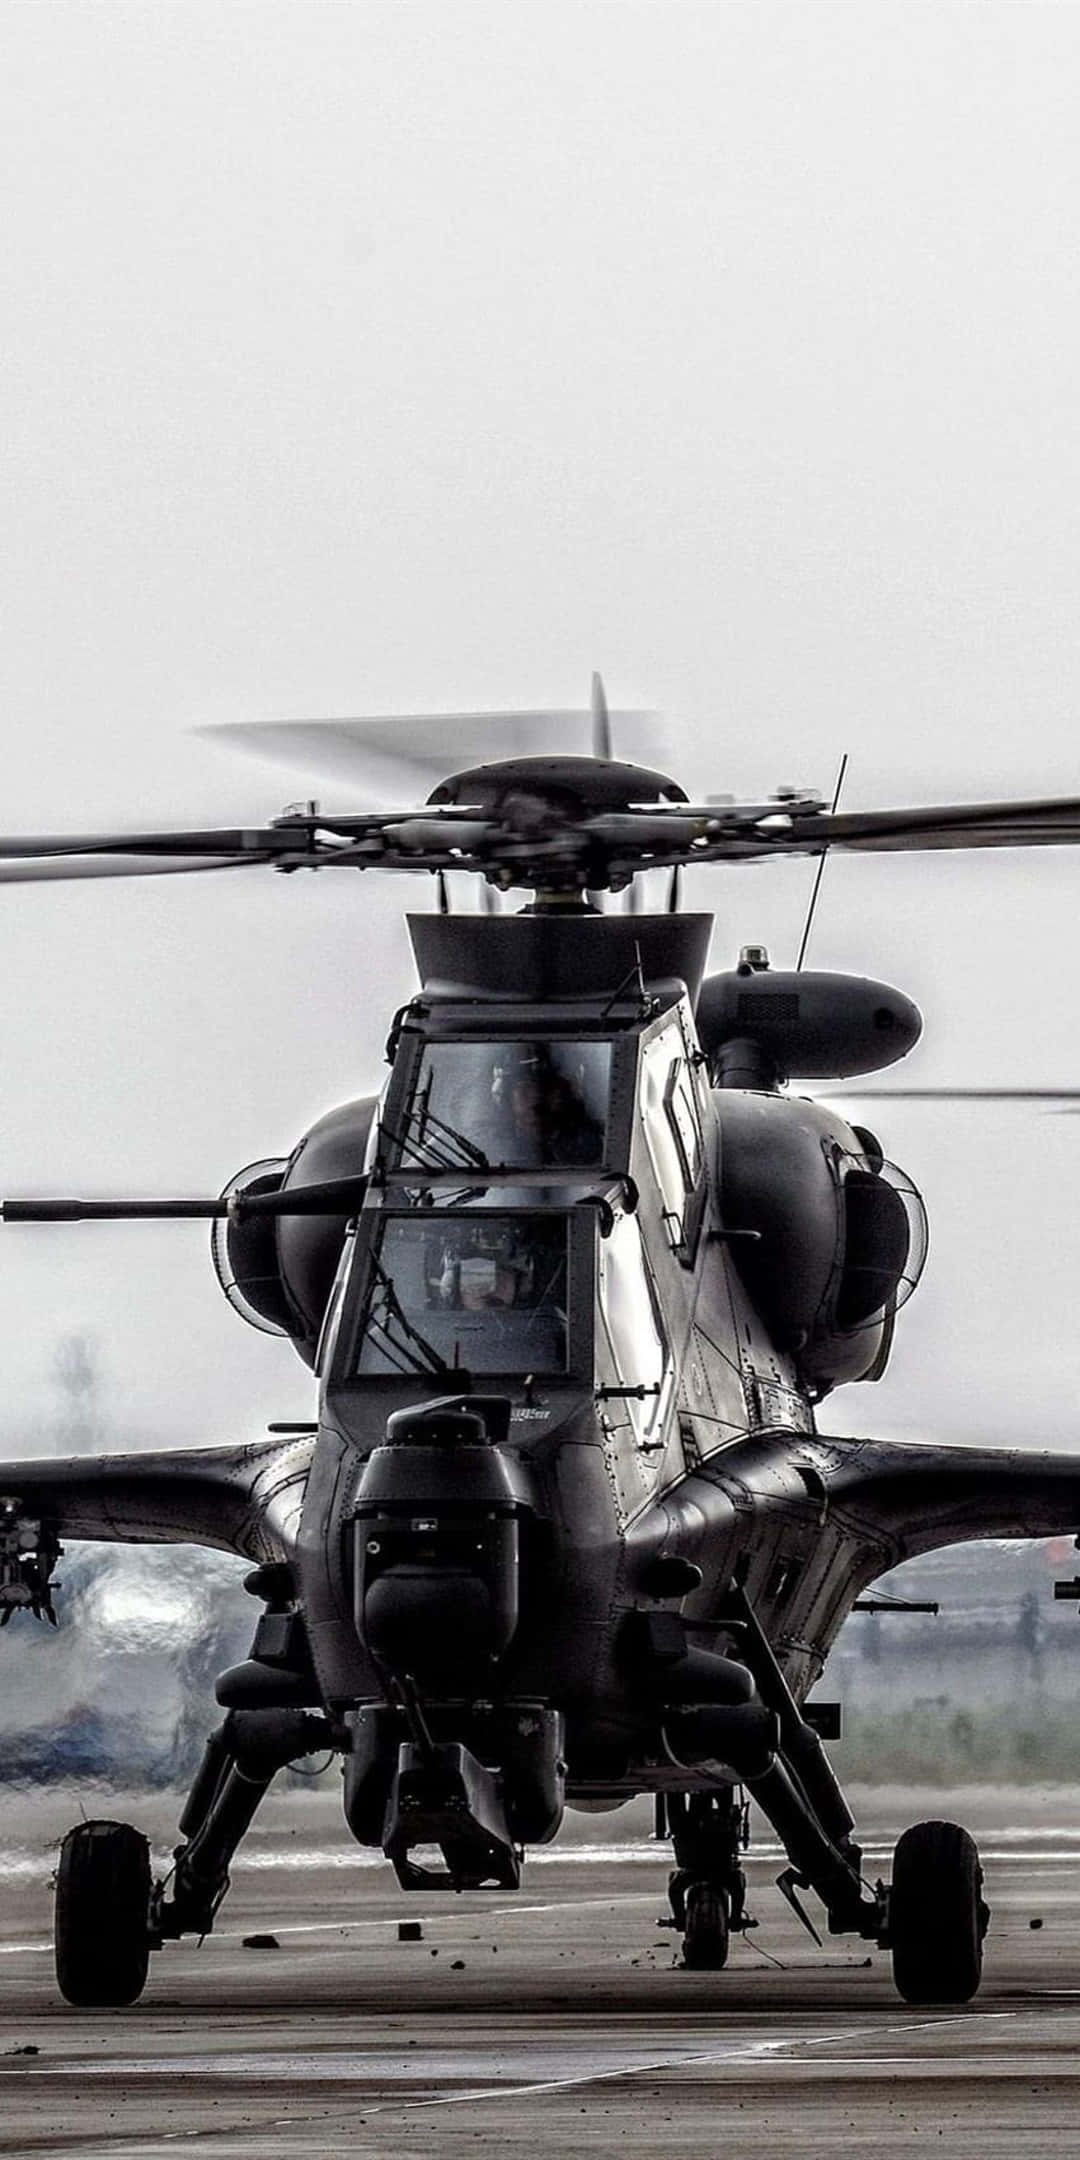 Black Caic Z-10 Pixel 3 Helicopter Background